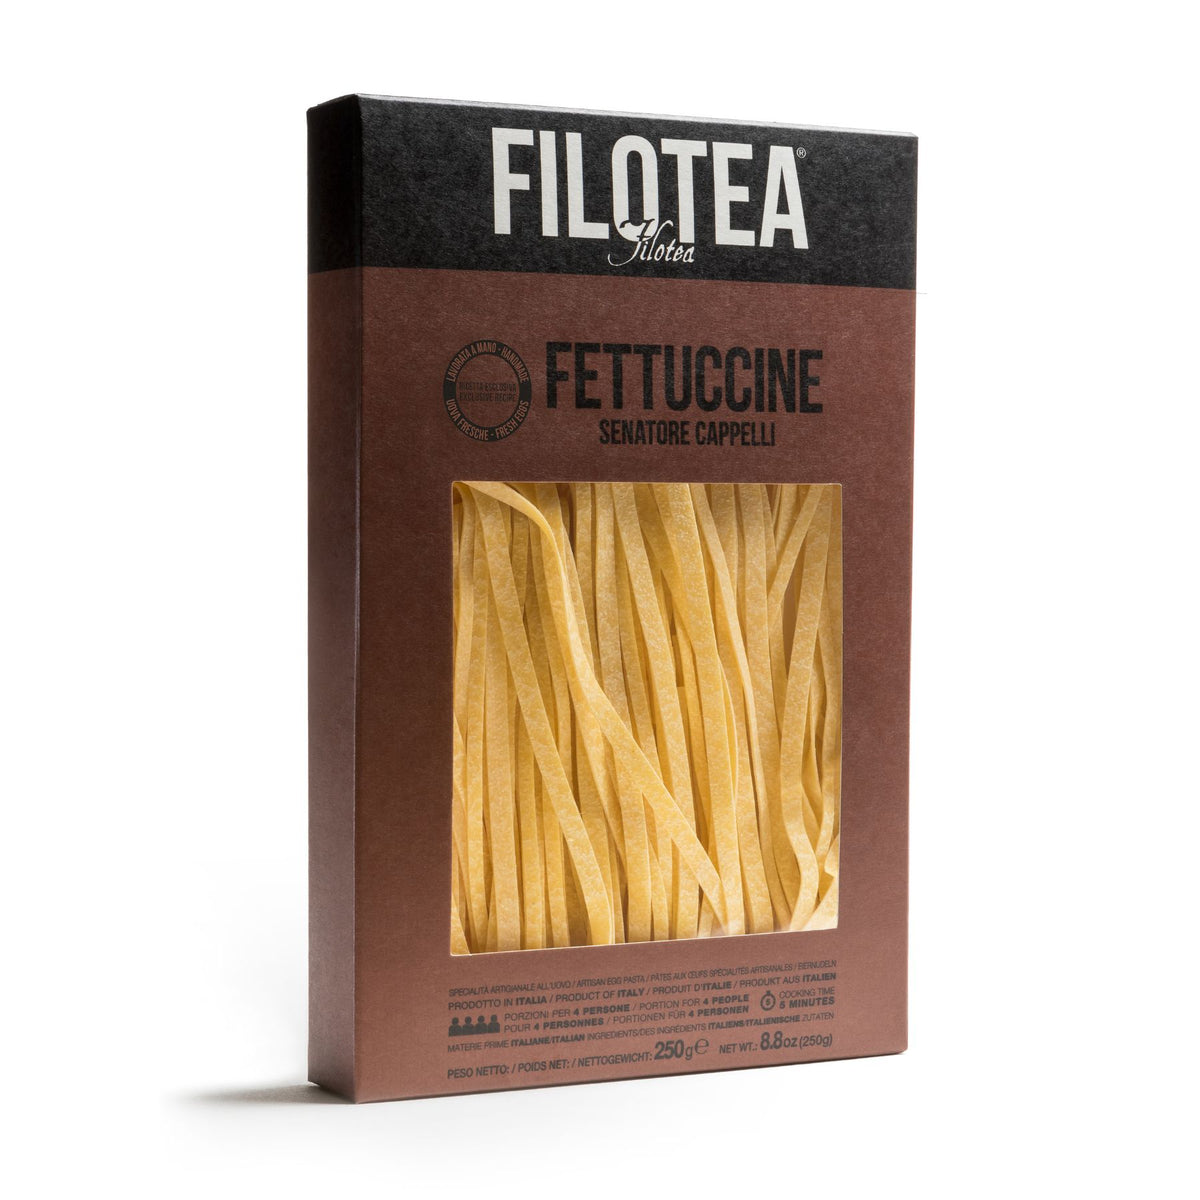 Filotea Senatore Cappelli Fettuccine 250g | Imported and distributed in the UK by Just Gourmet Foods